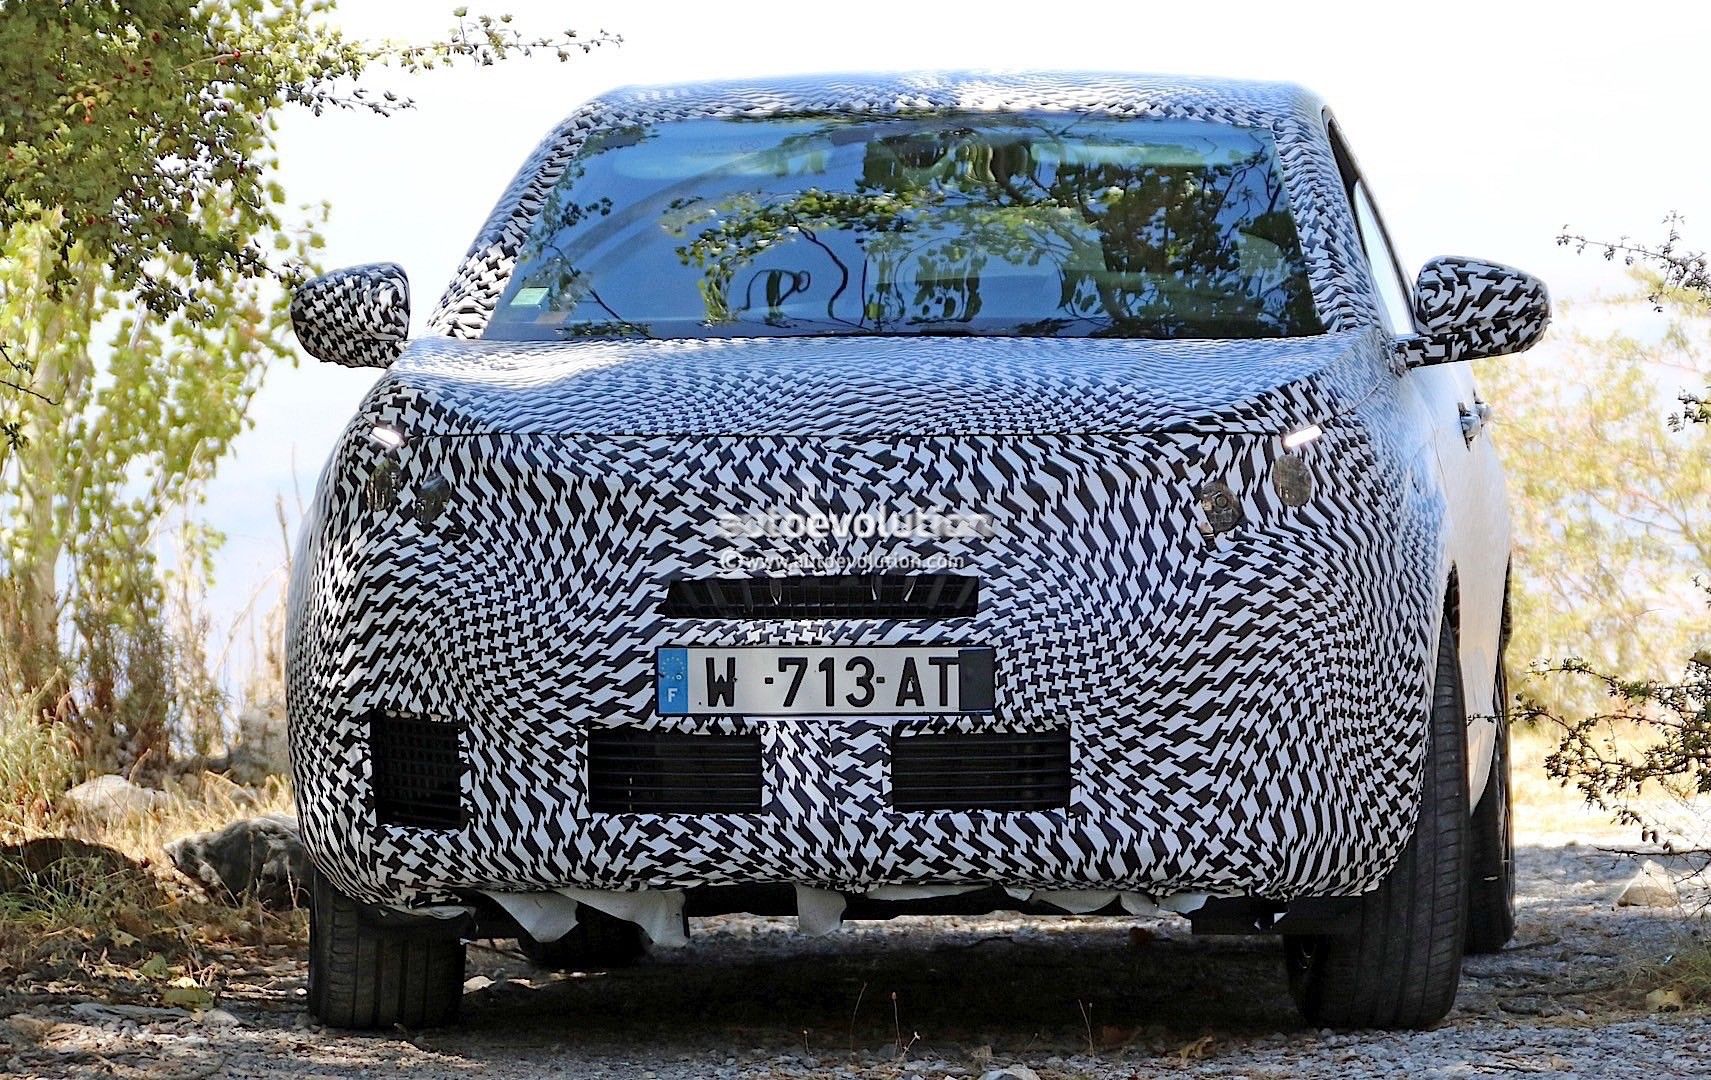 All-new Peugeot 3008 Test Mule Spied Ahead of Geneva Motor Show